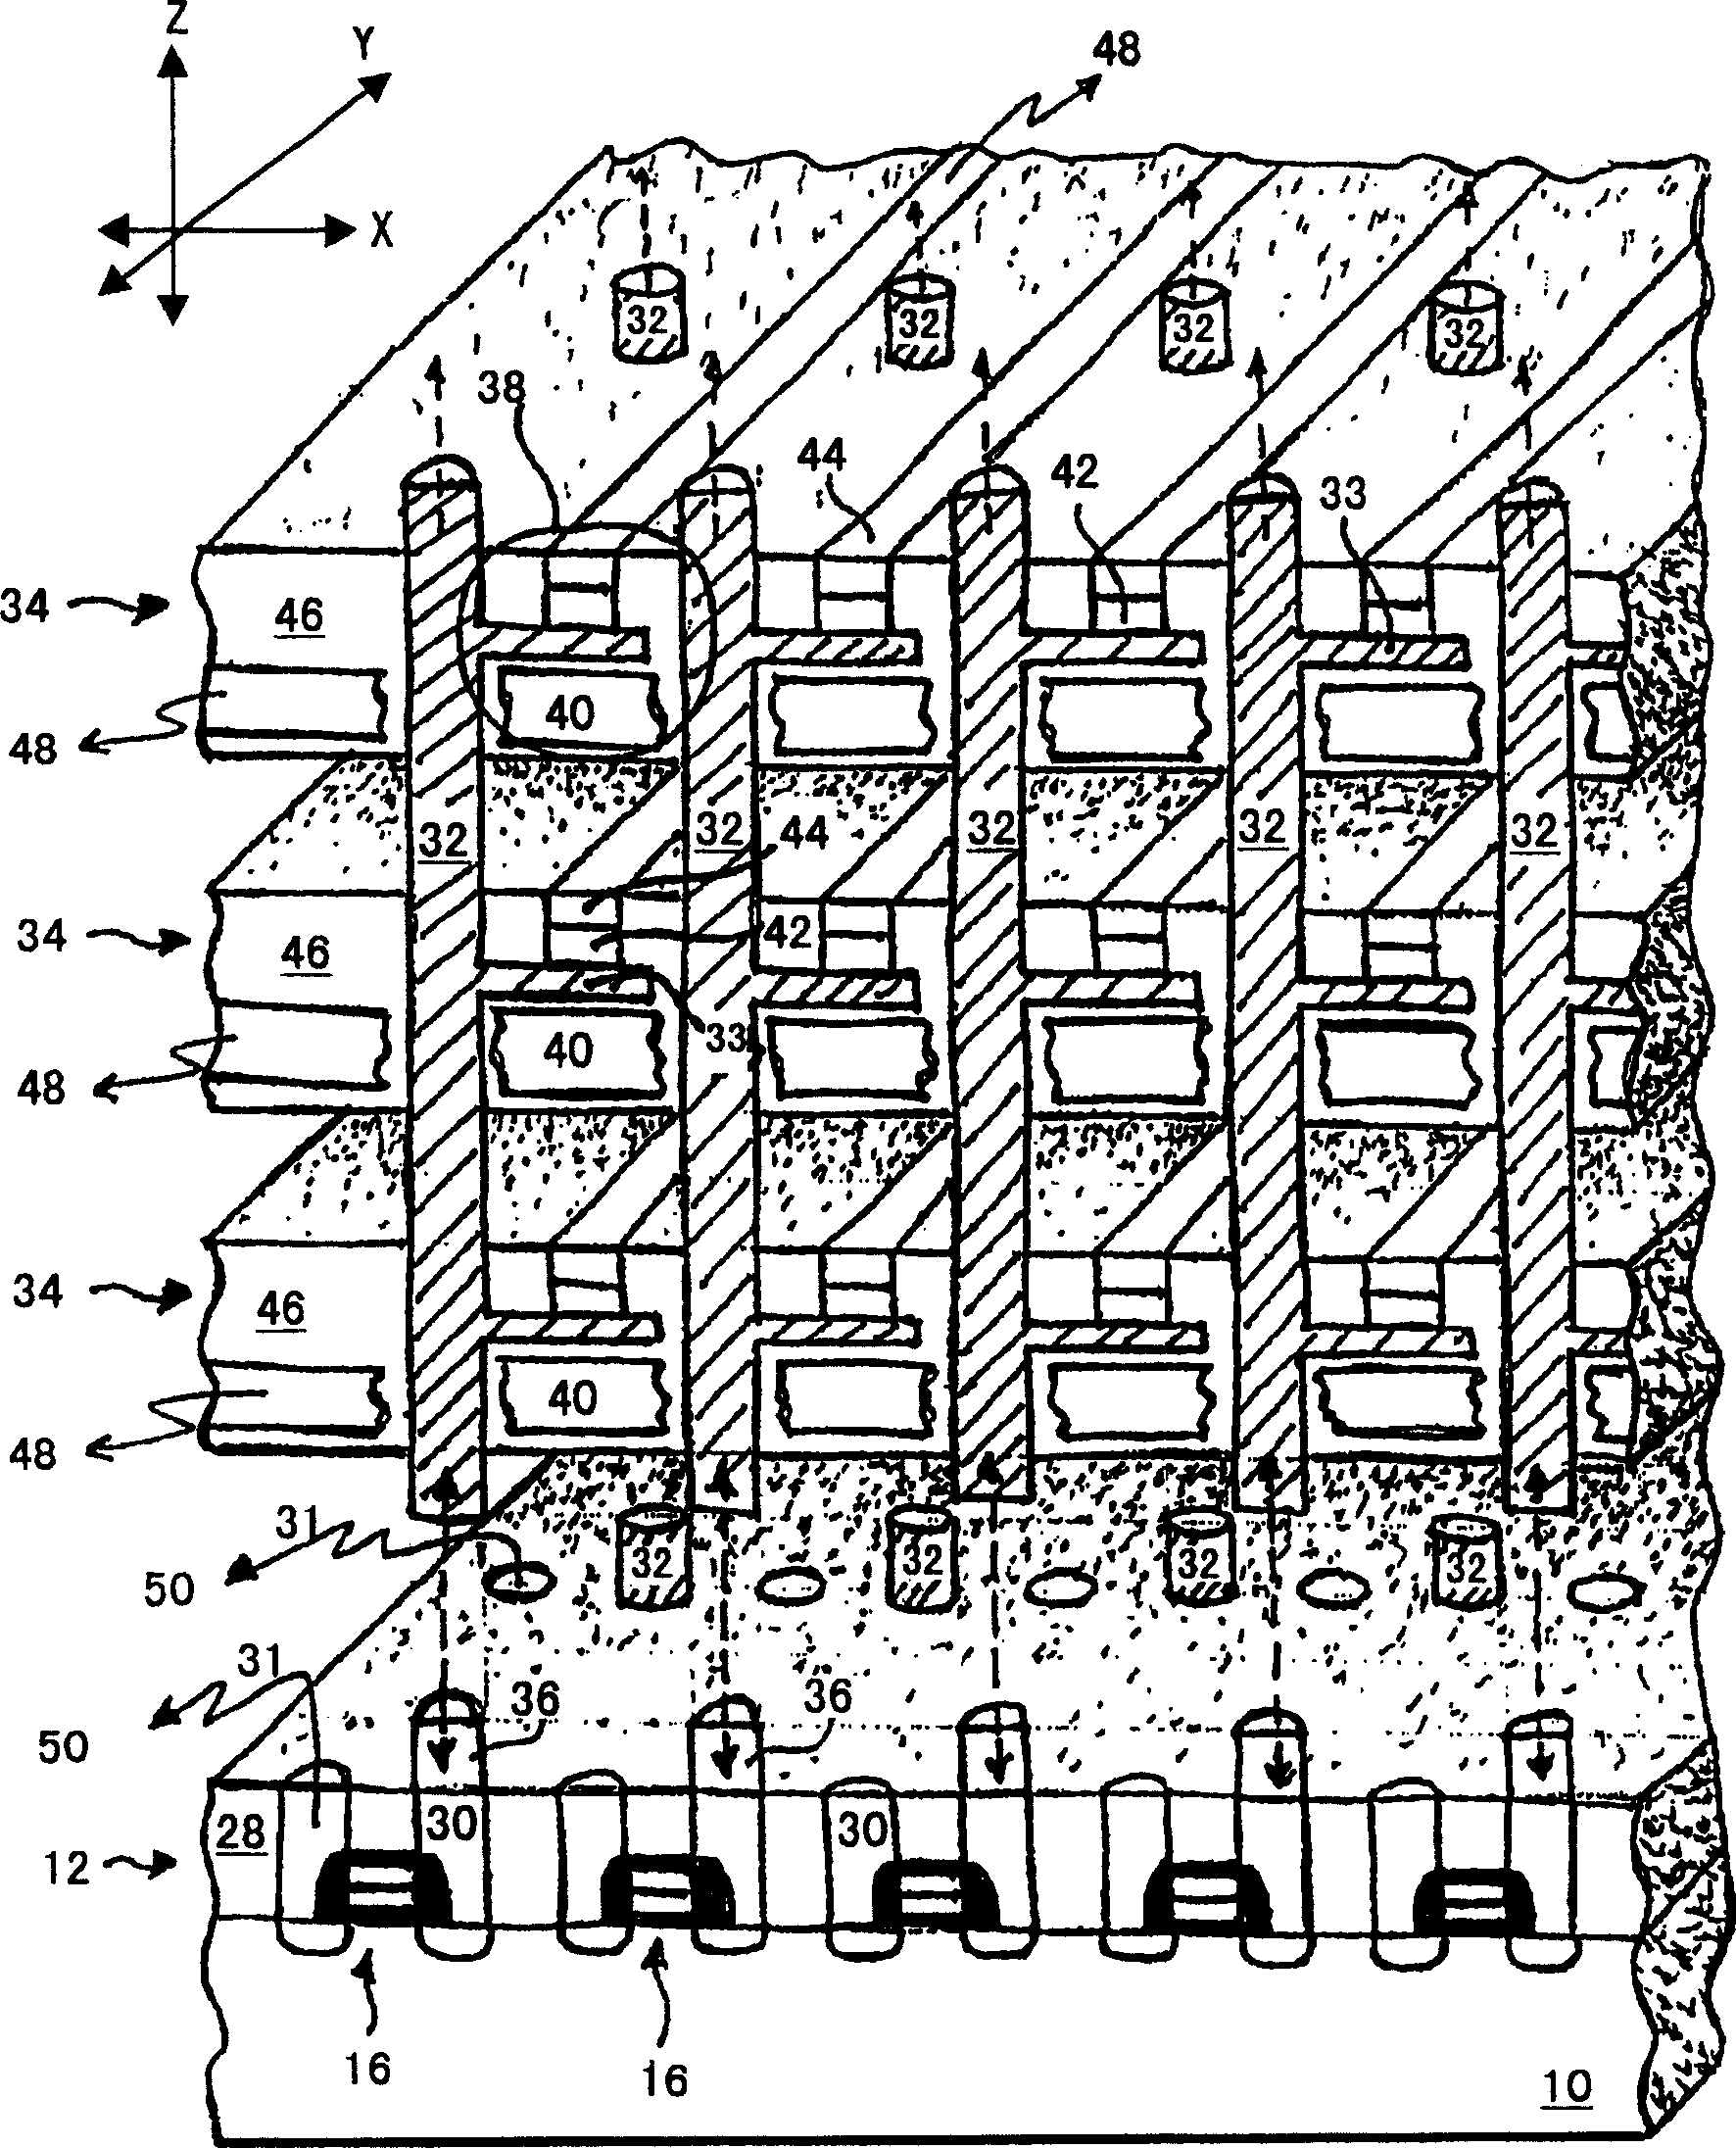 Stacked 1t-n memory cell structure